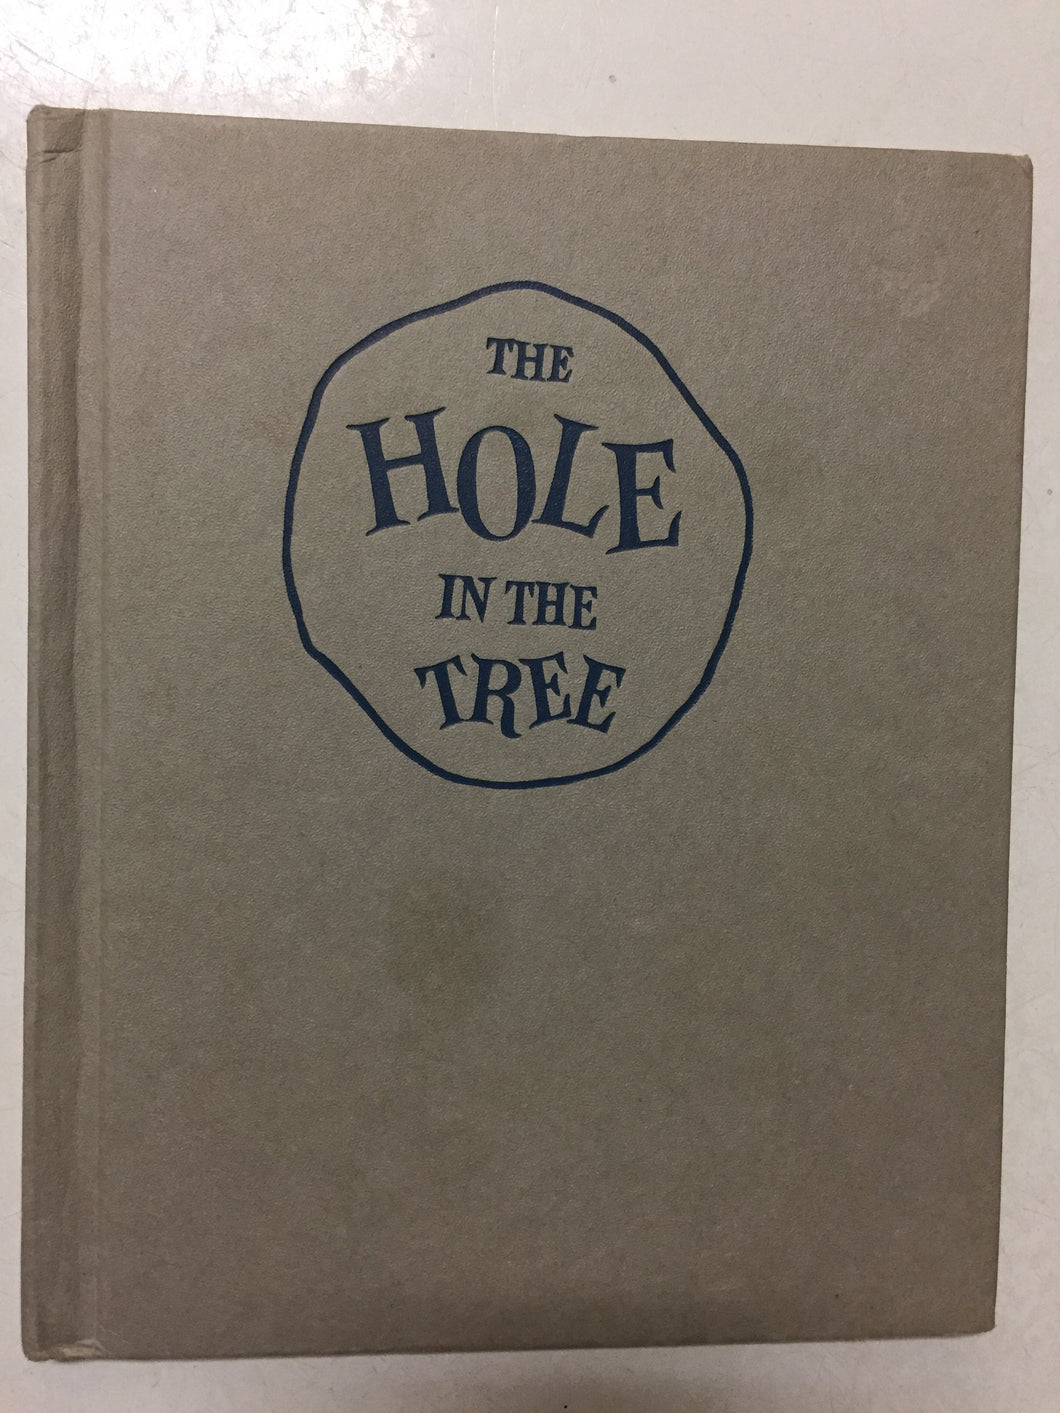 The Hole In the Tree - Slickcatbooks